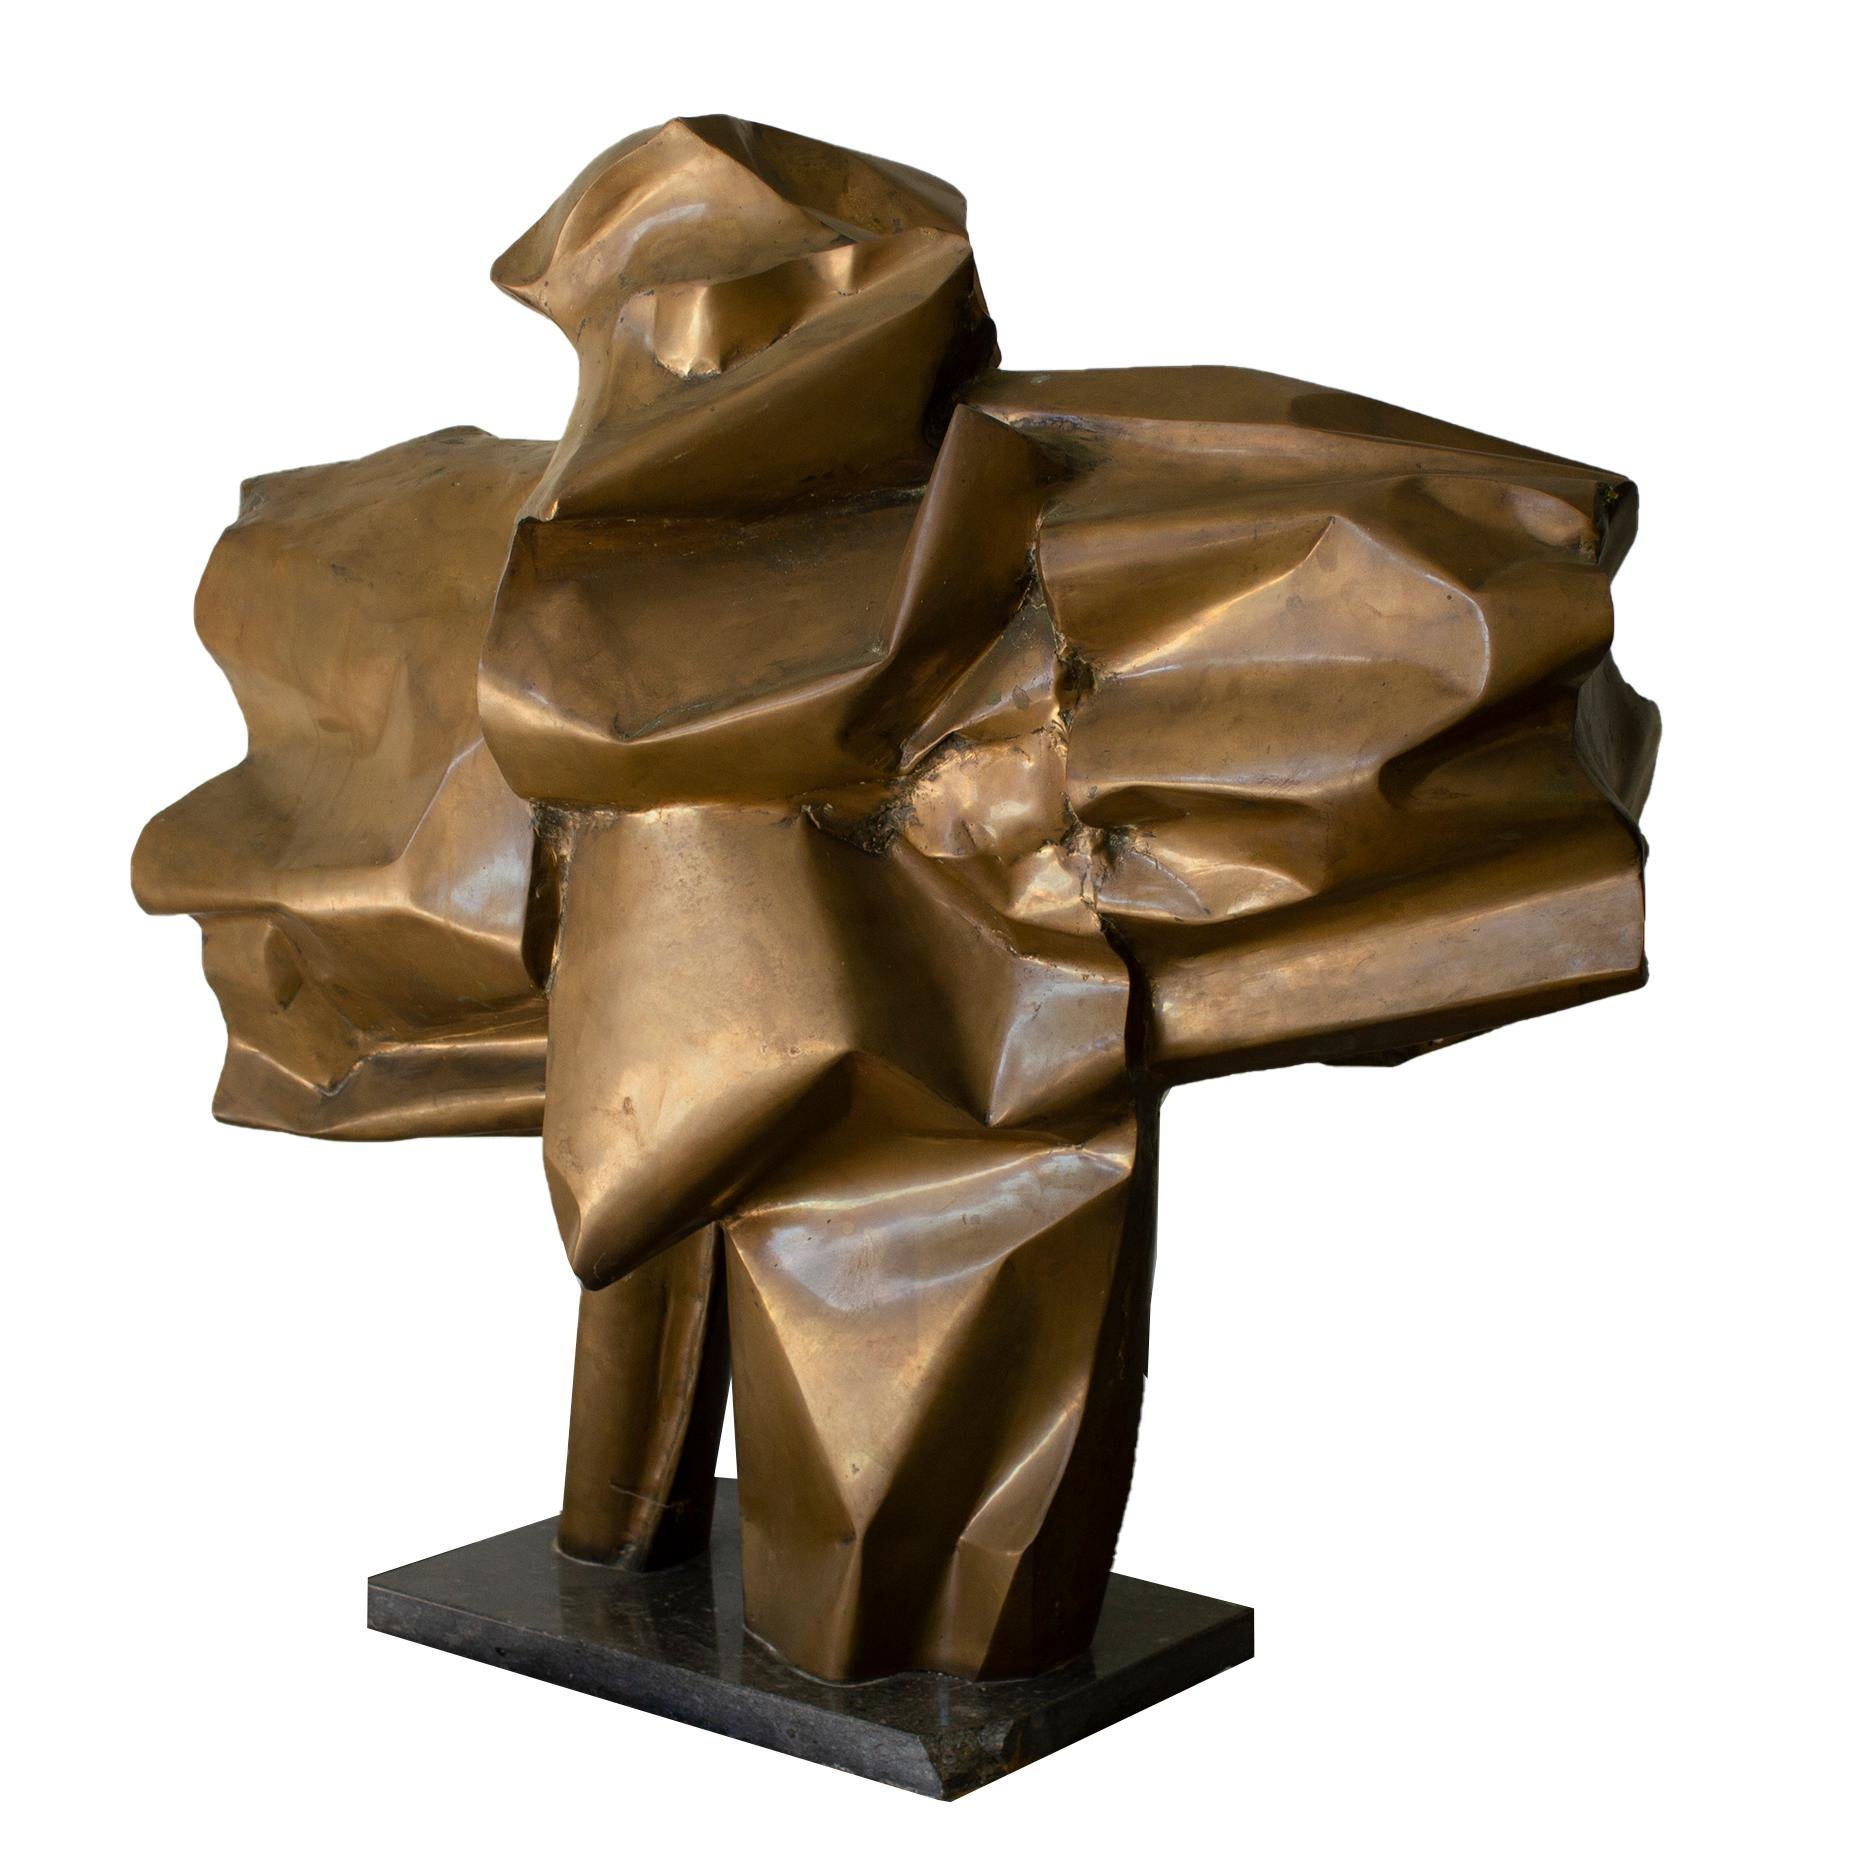 Abbott Pattison Sculpture Abstract Bronze Titled 'Flight' 1977, Large Scale For Sale 1